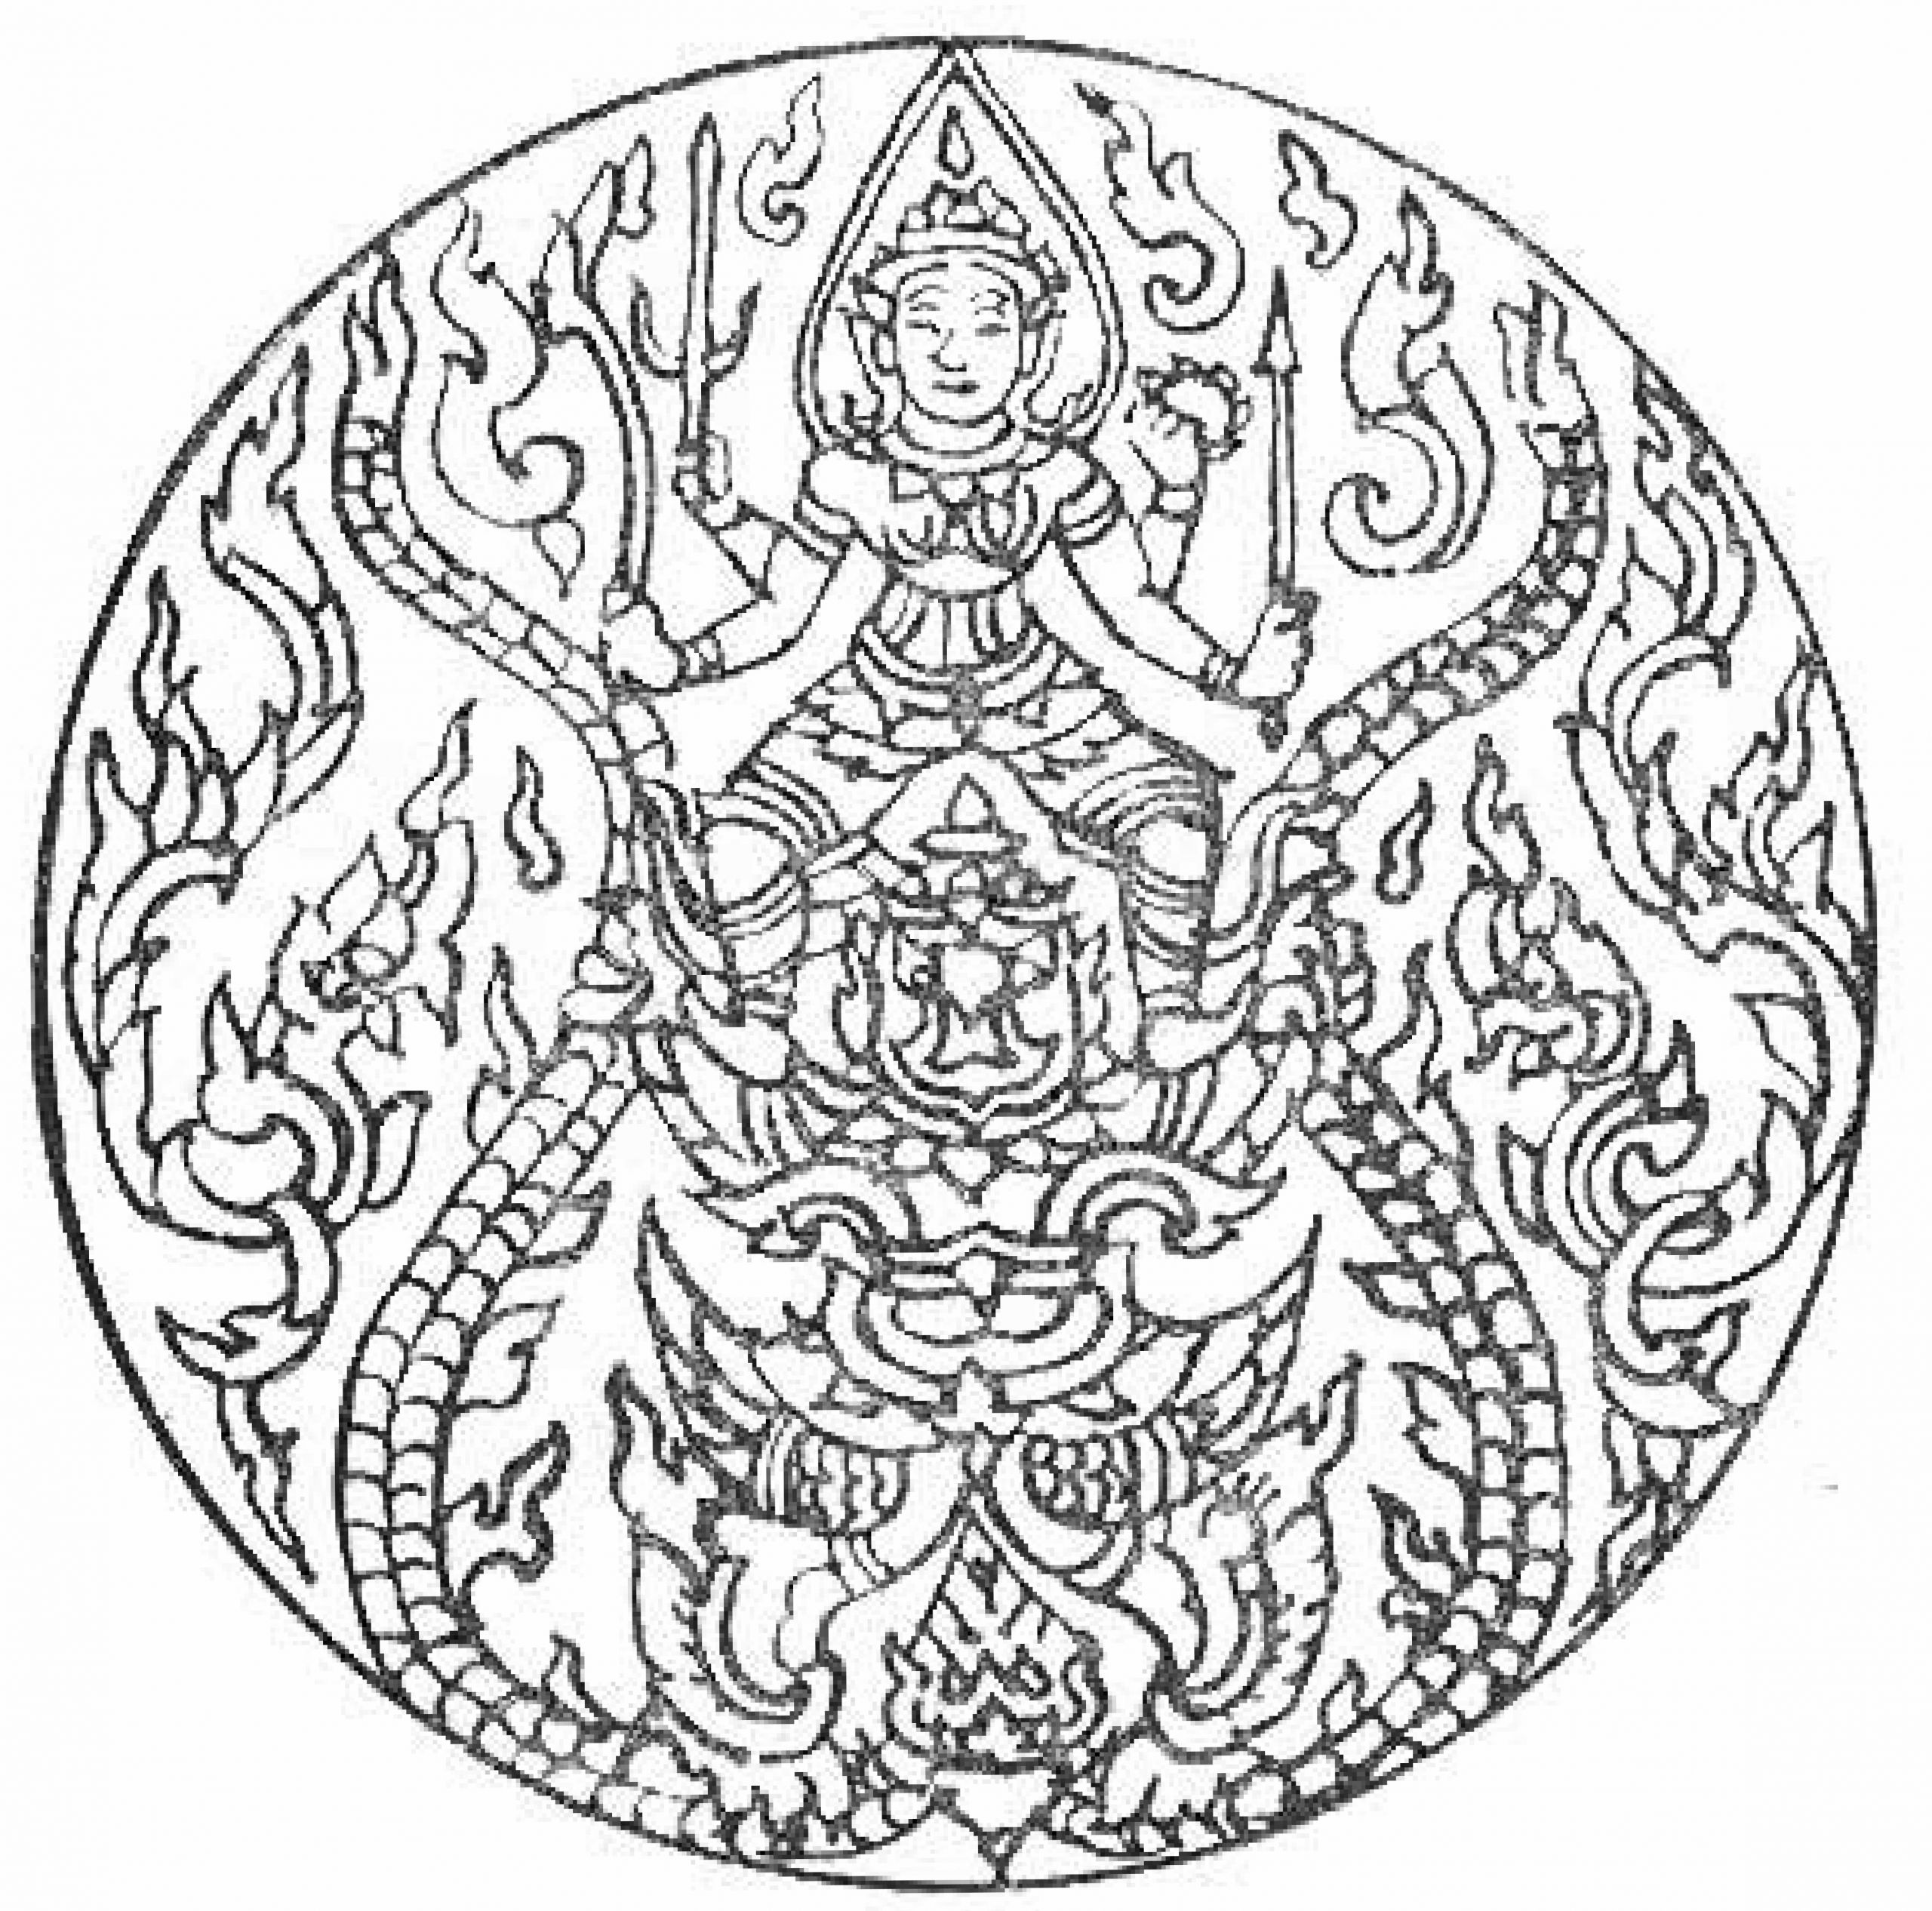 Free Mandala Coloring Pages For Adults
 Free Printable Mandala Coloring Pages For Adults Best